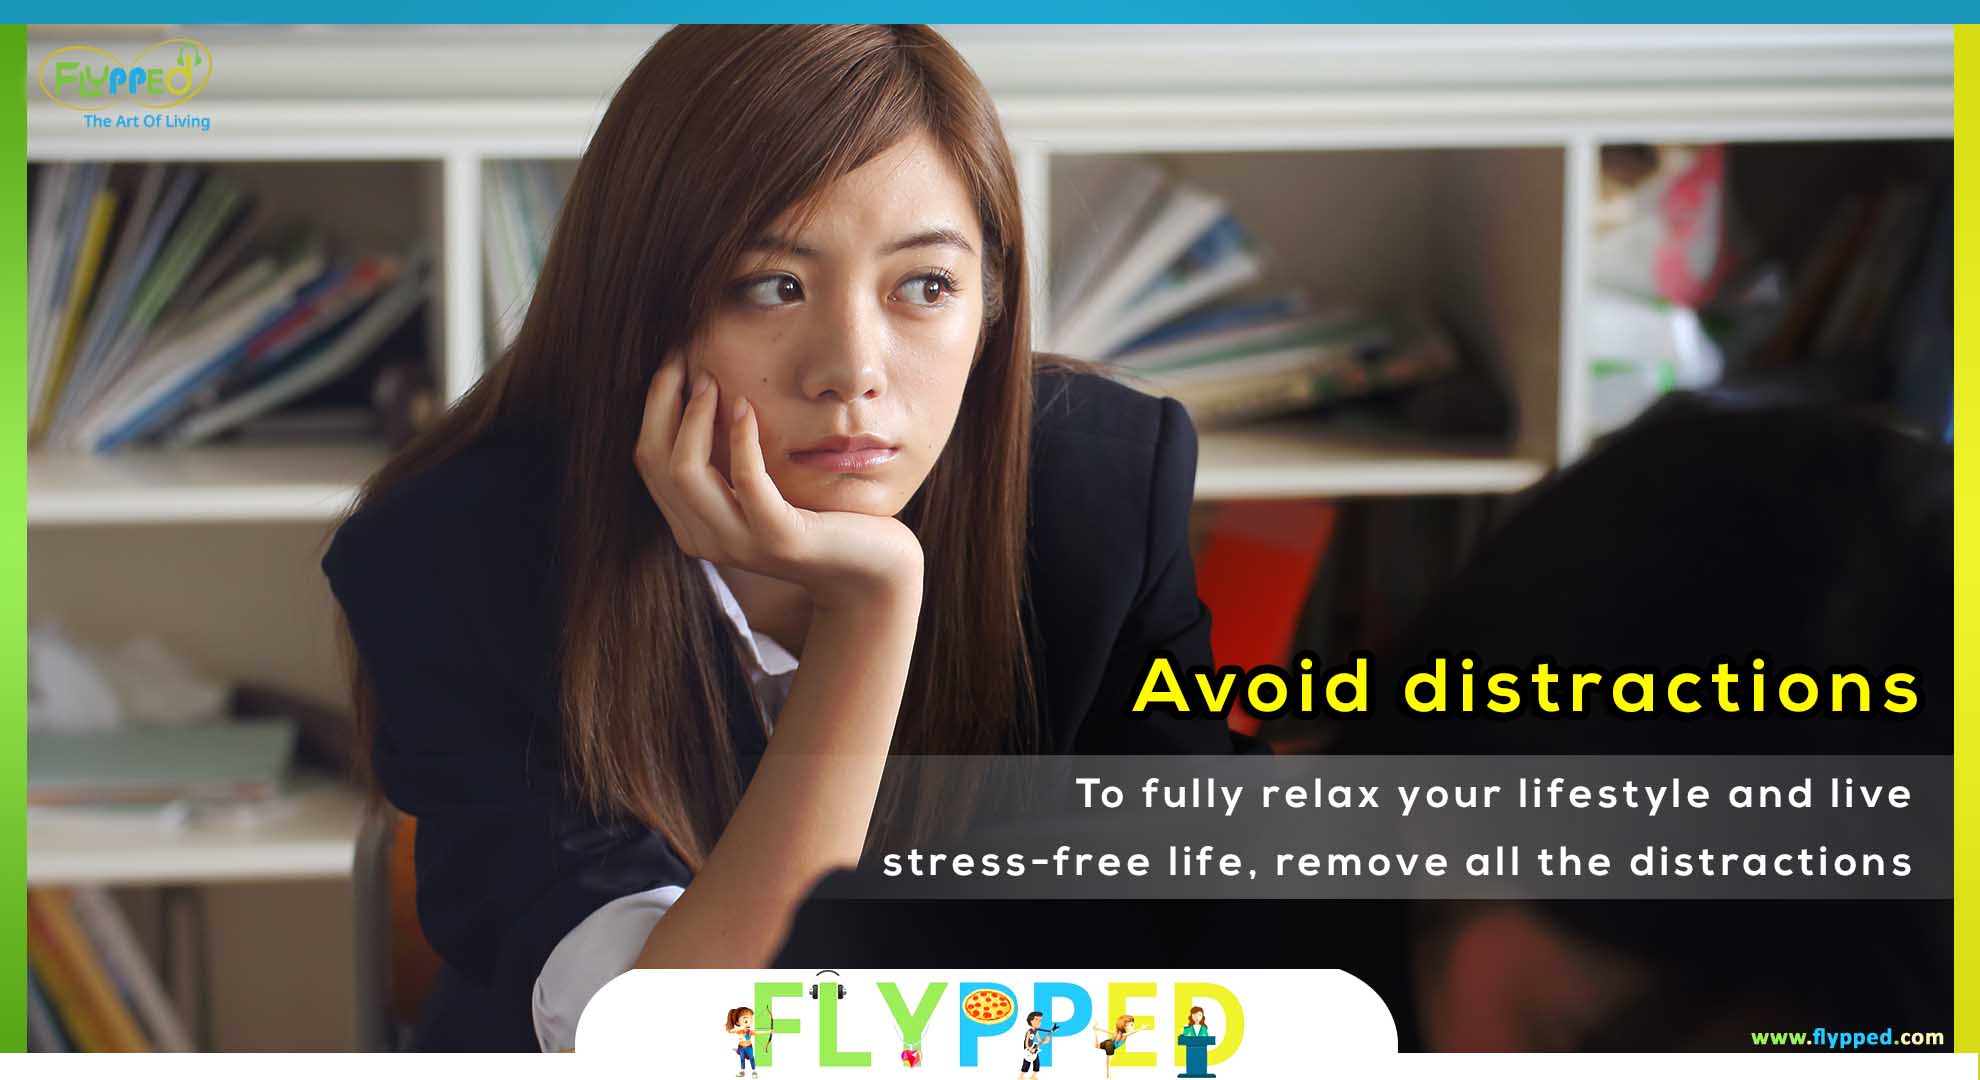 Tips-for-a-stress-free-life-avoid-distractions